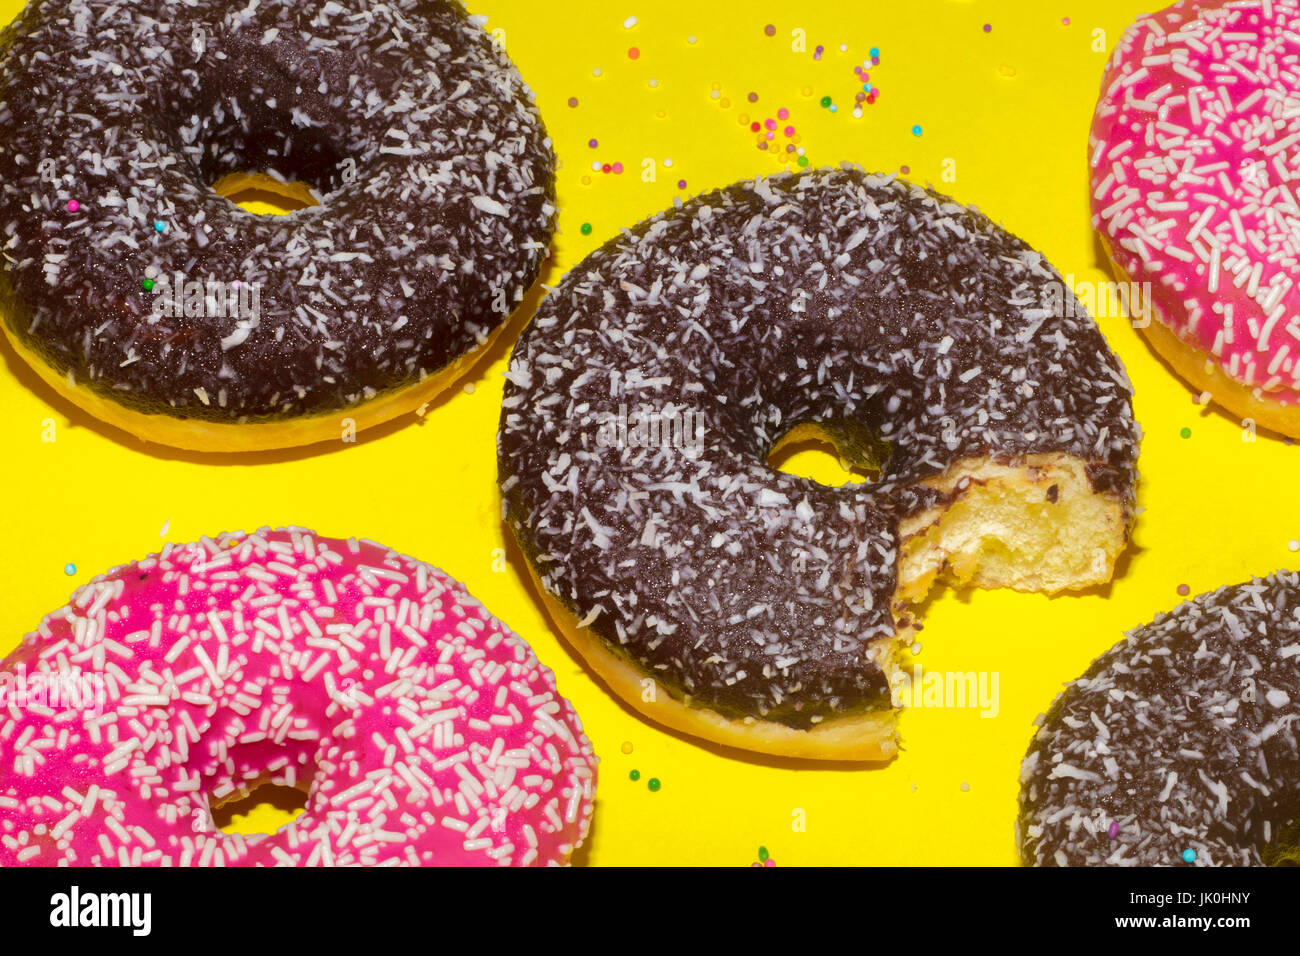 Strawberry and chocolate frosted donuts on yellow background Stock Photo